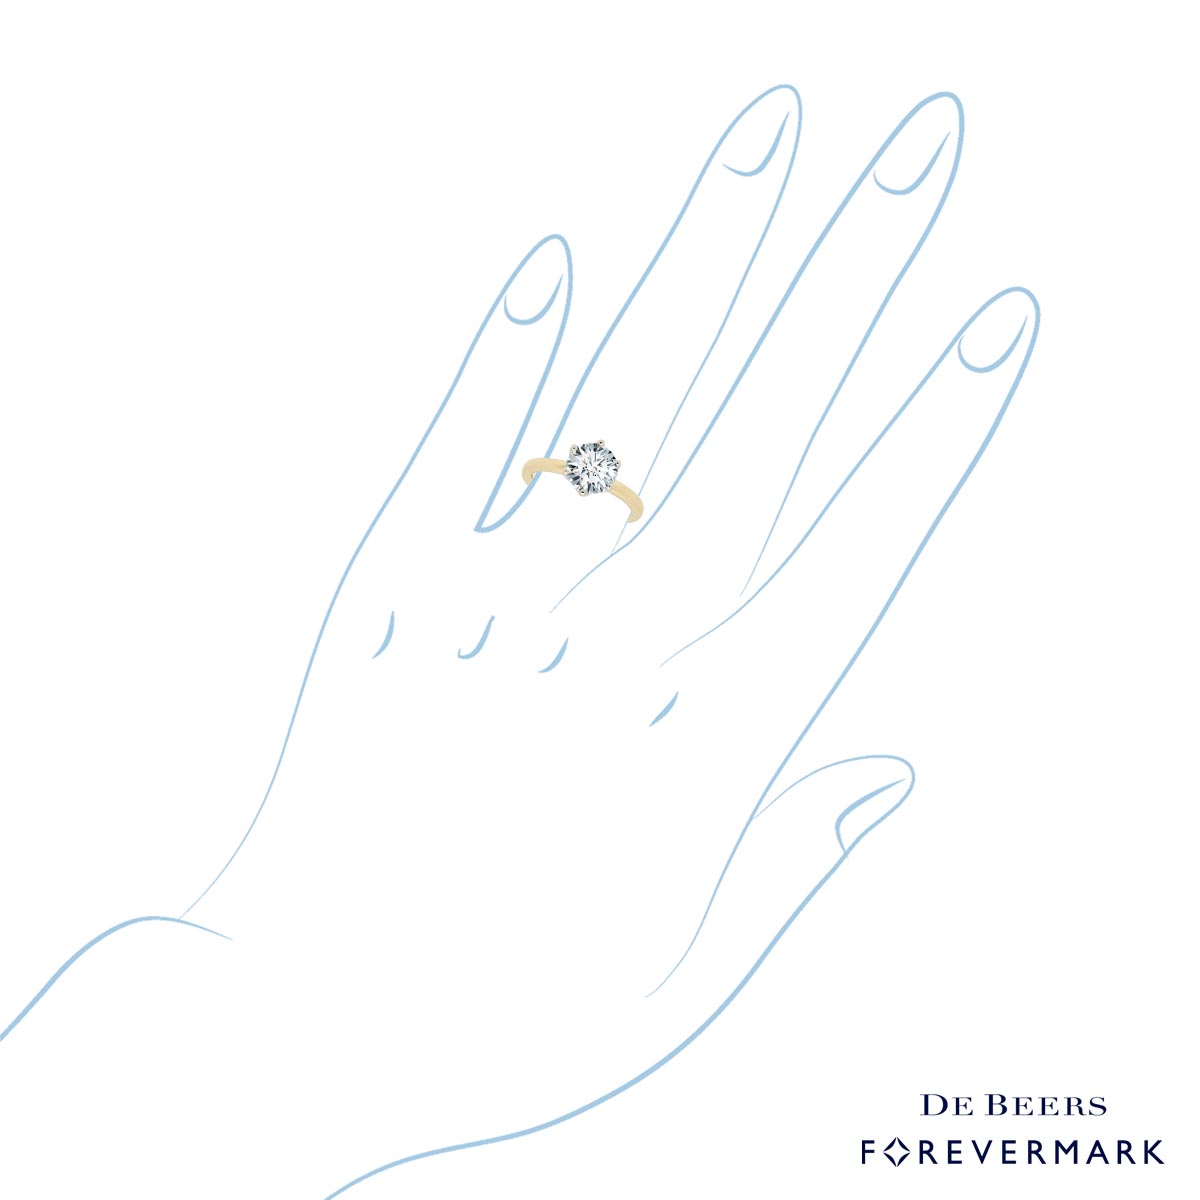 De Beers Forevermark Diamond Solitaire Engagement Ring in 14kt Yellow and White Gold (2ct tw)